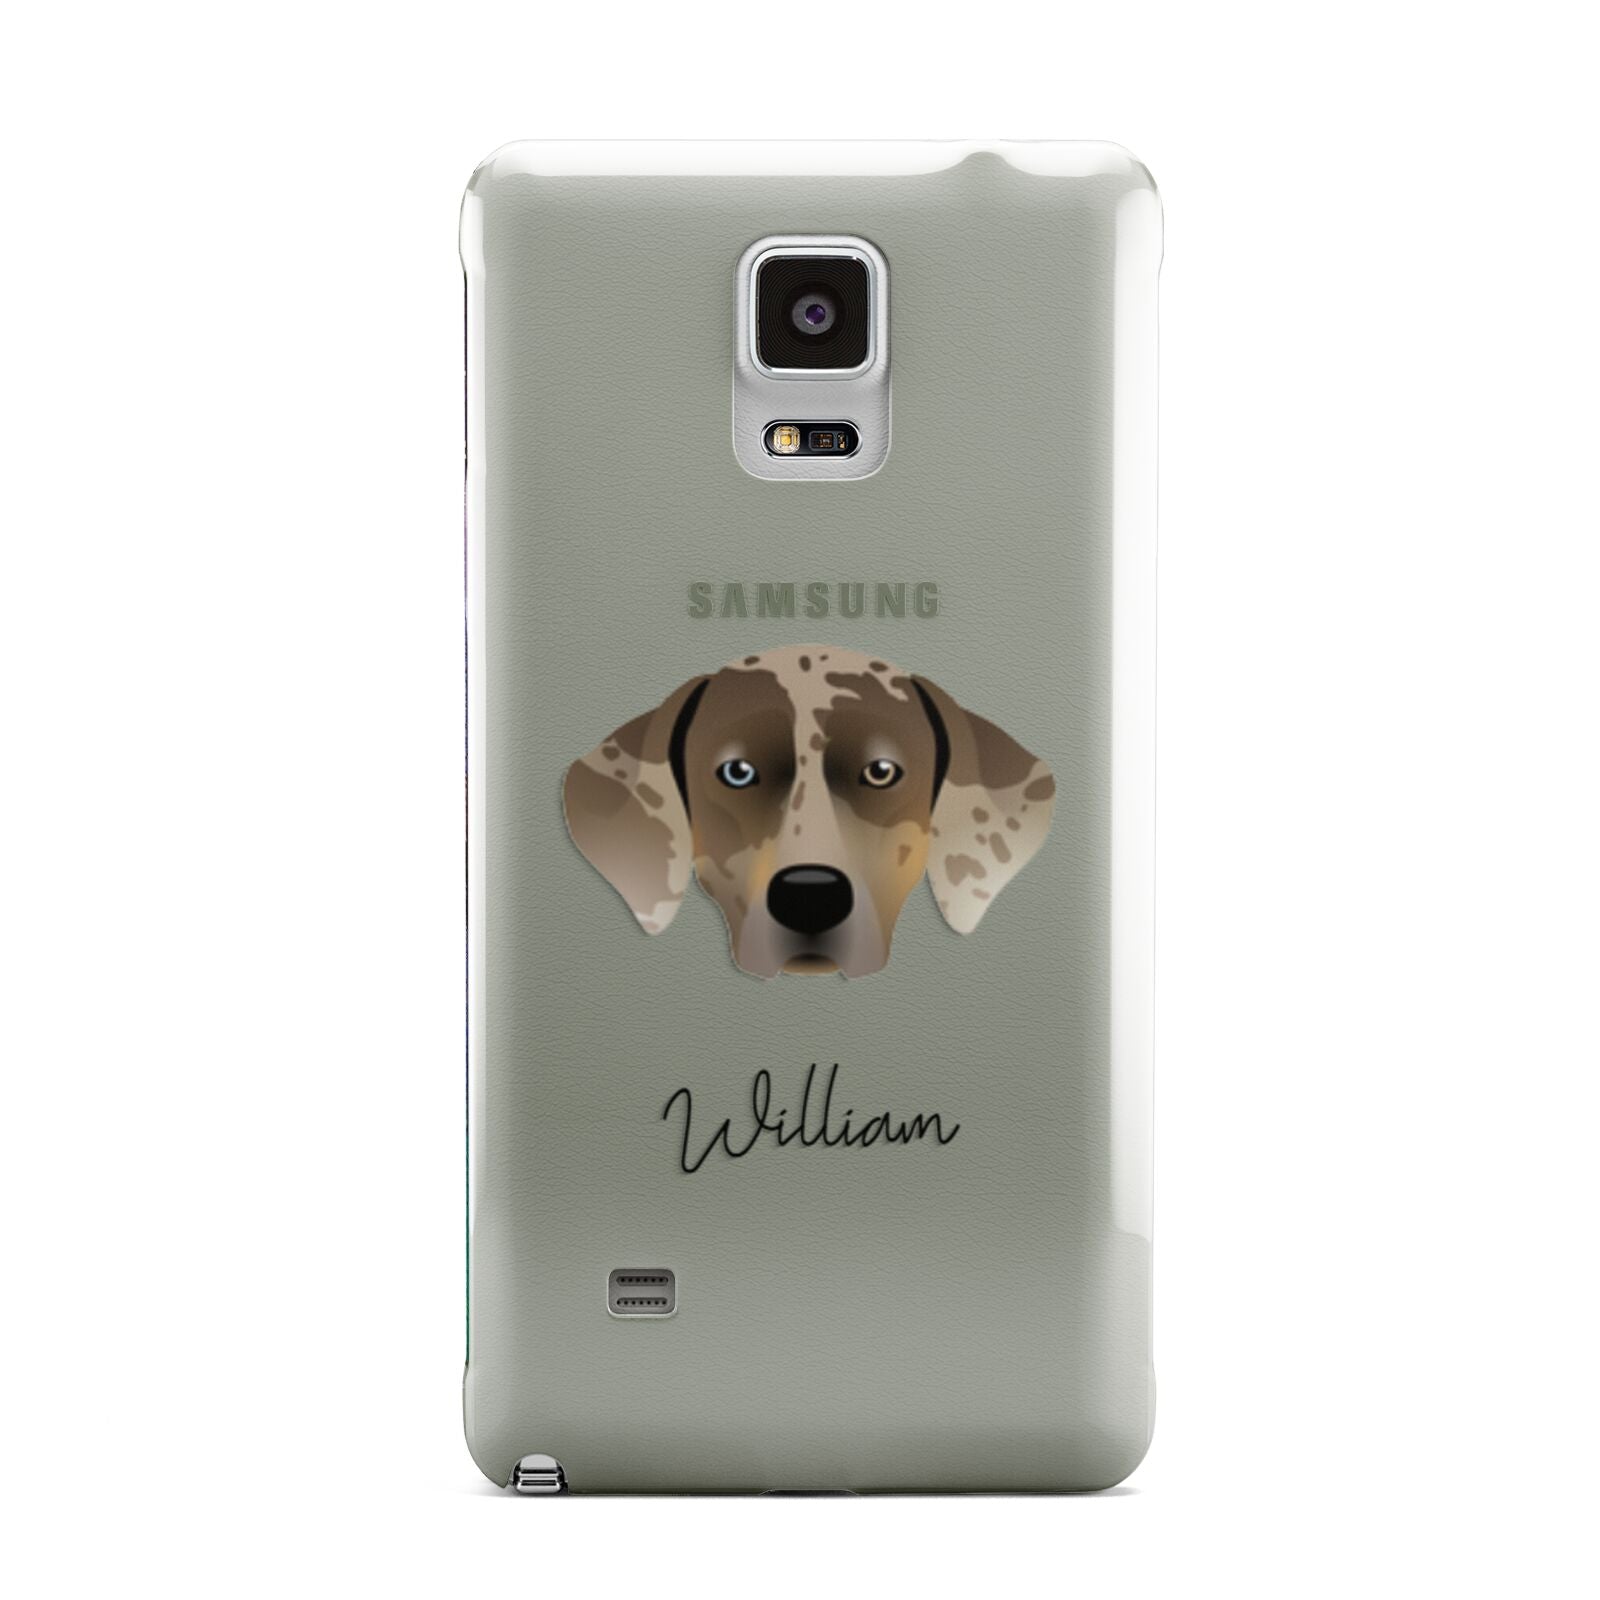 Catahoula Leopard Dog Personalised Samsung Galaxy Note 4 Case